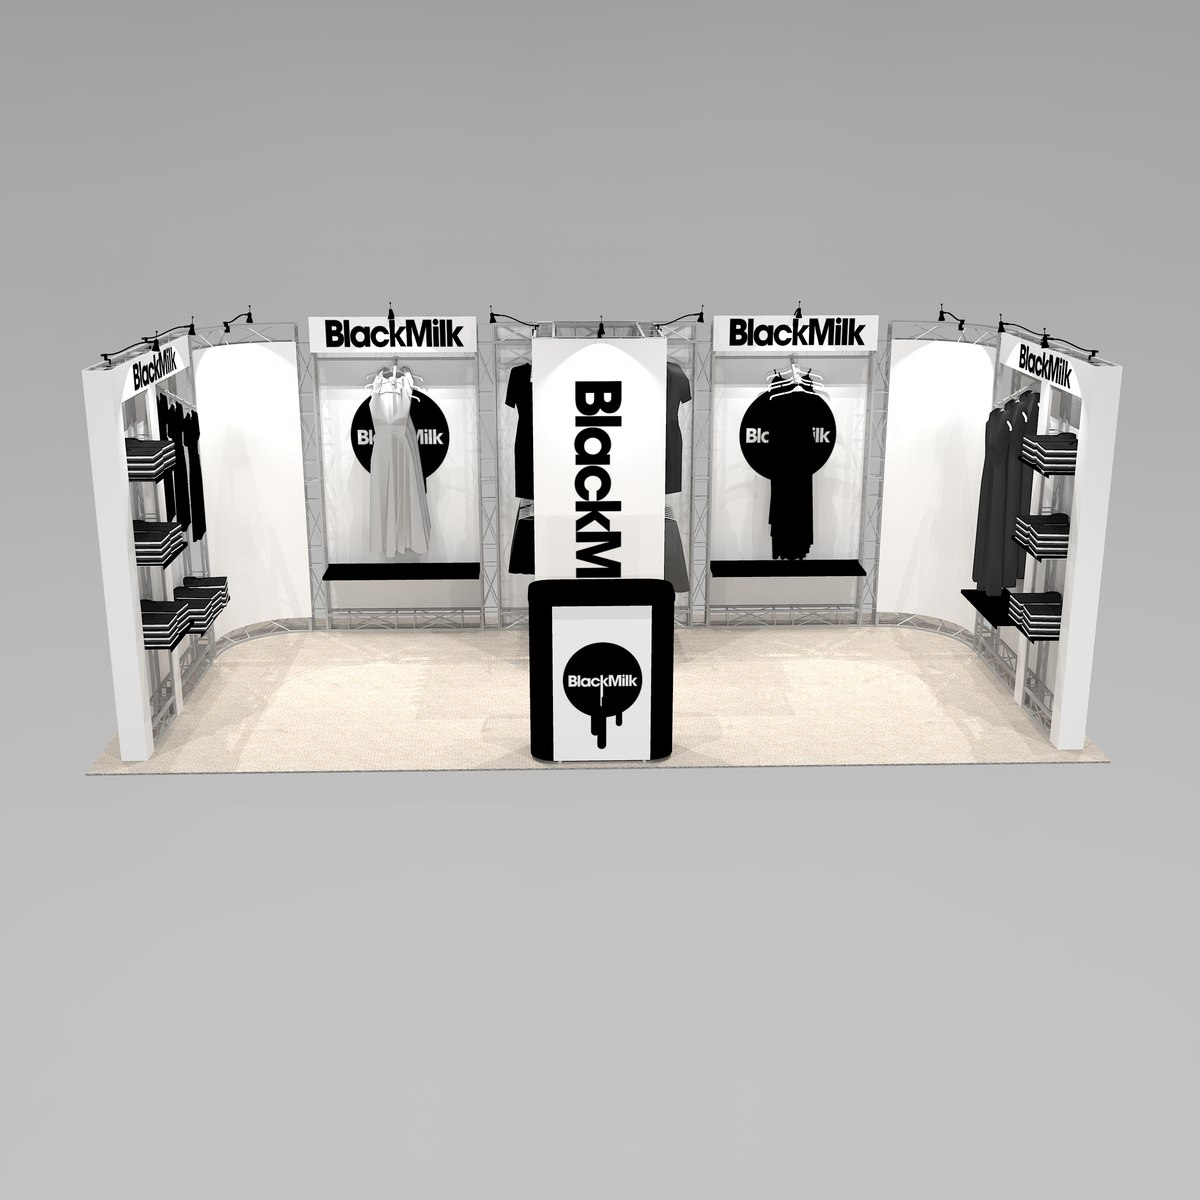 Clothing and merchandise trade show exhibit design SAL1020 Graphic Package B